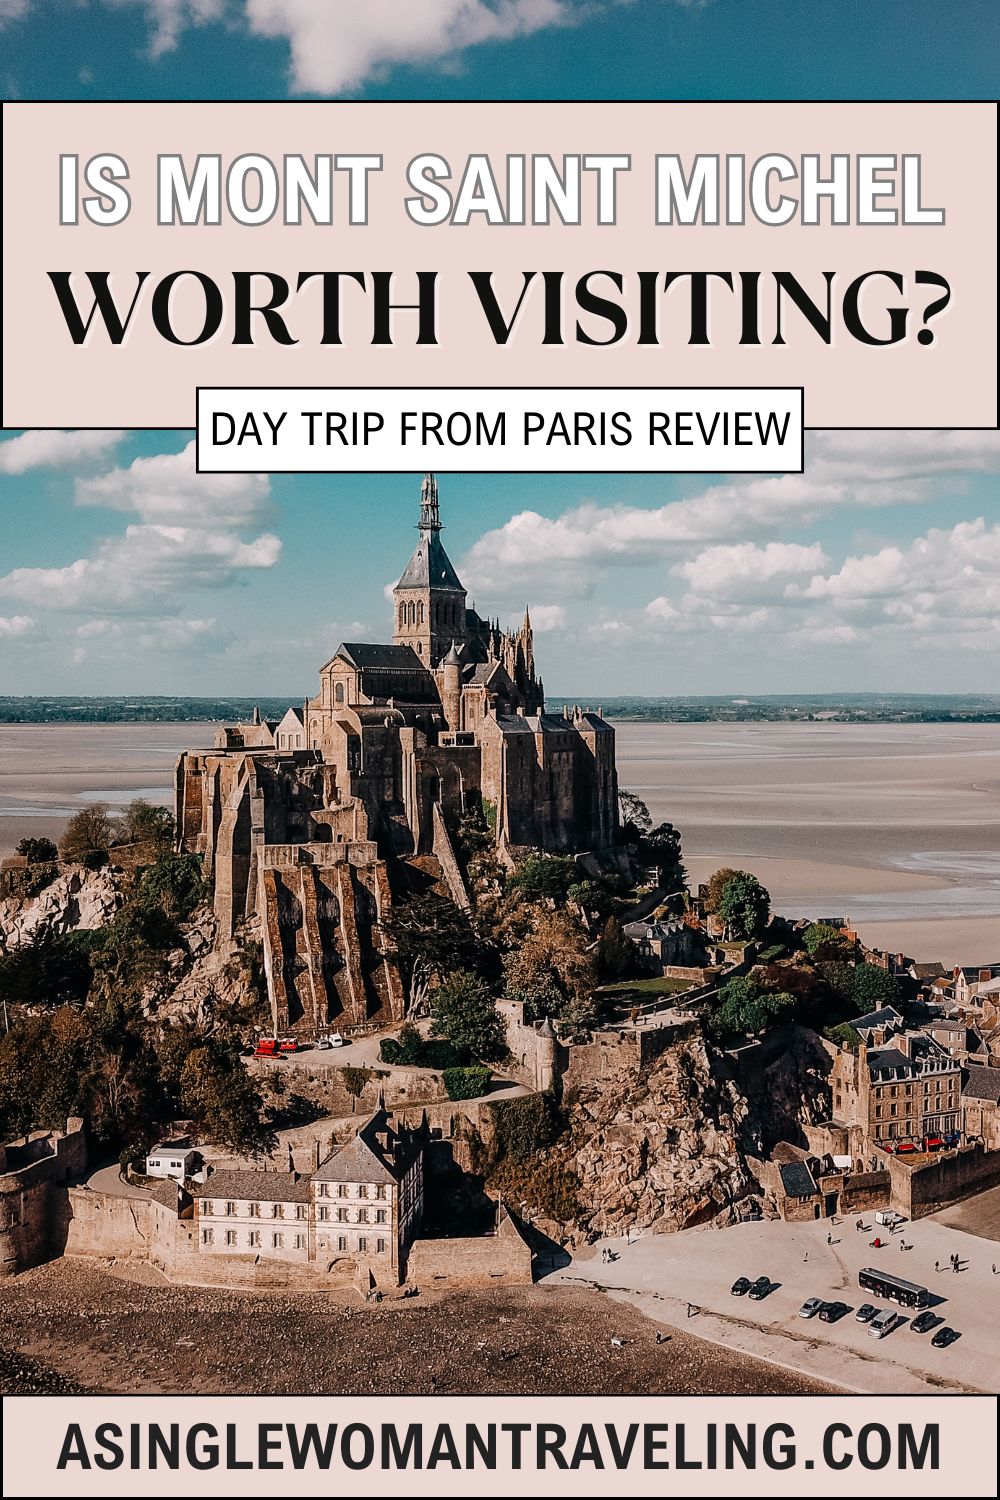 Promotional poster asking 'Is Mont Saint Michel Worth Visiting?' with a stunning aerial view of Mont Saint Michel, featuring its intricate architecture and the surrounding bay, suggesting its allure as a day trip destination from Paris.